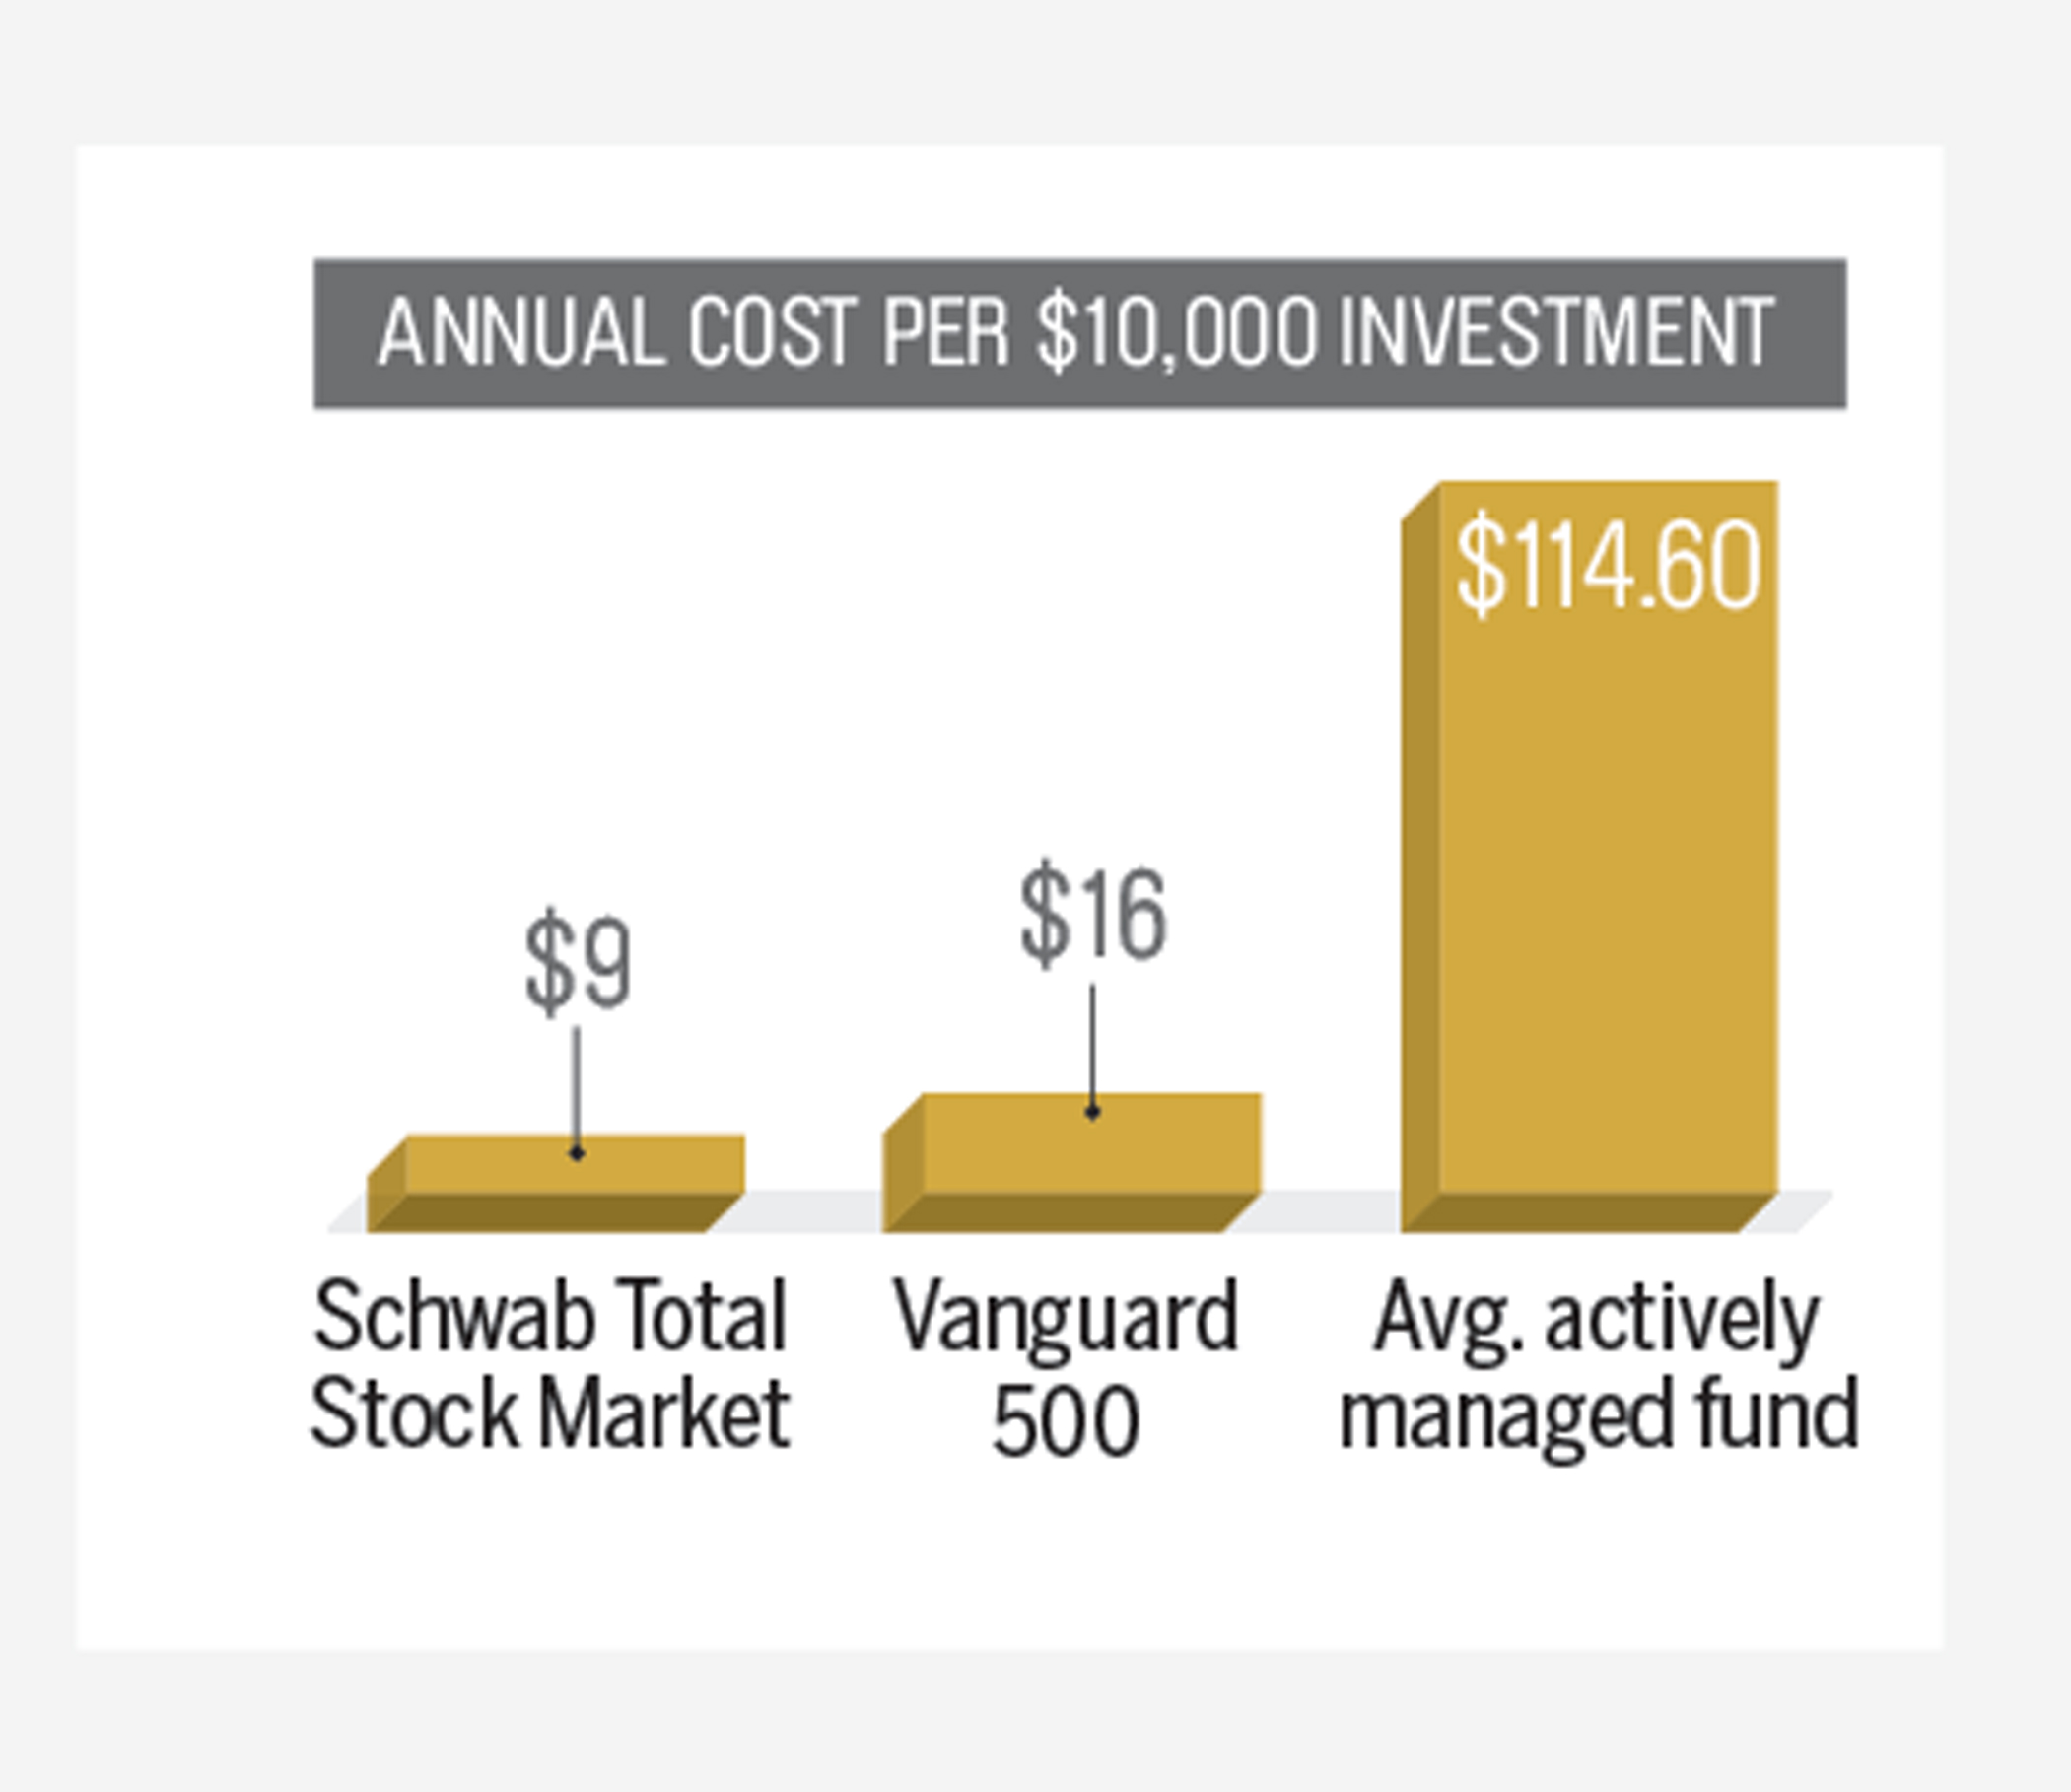 Note: Vanguard 500 annual expenses are based on the investor share class. Sources: ICI, Morningstar